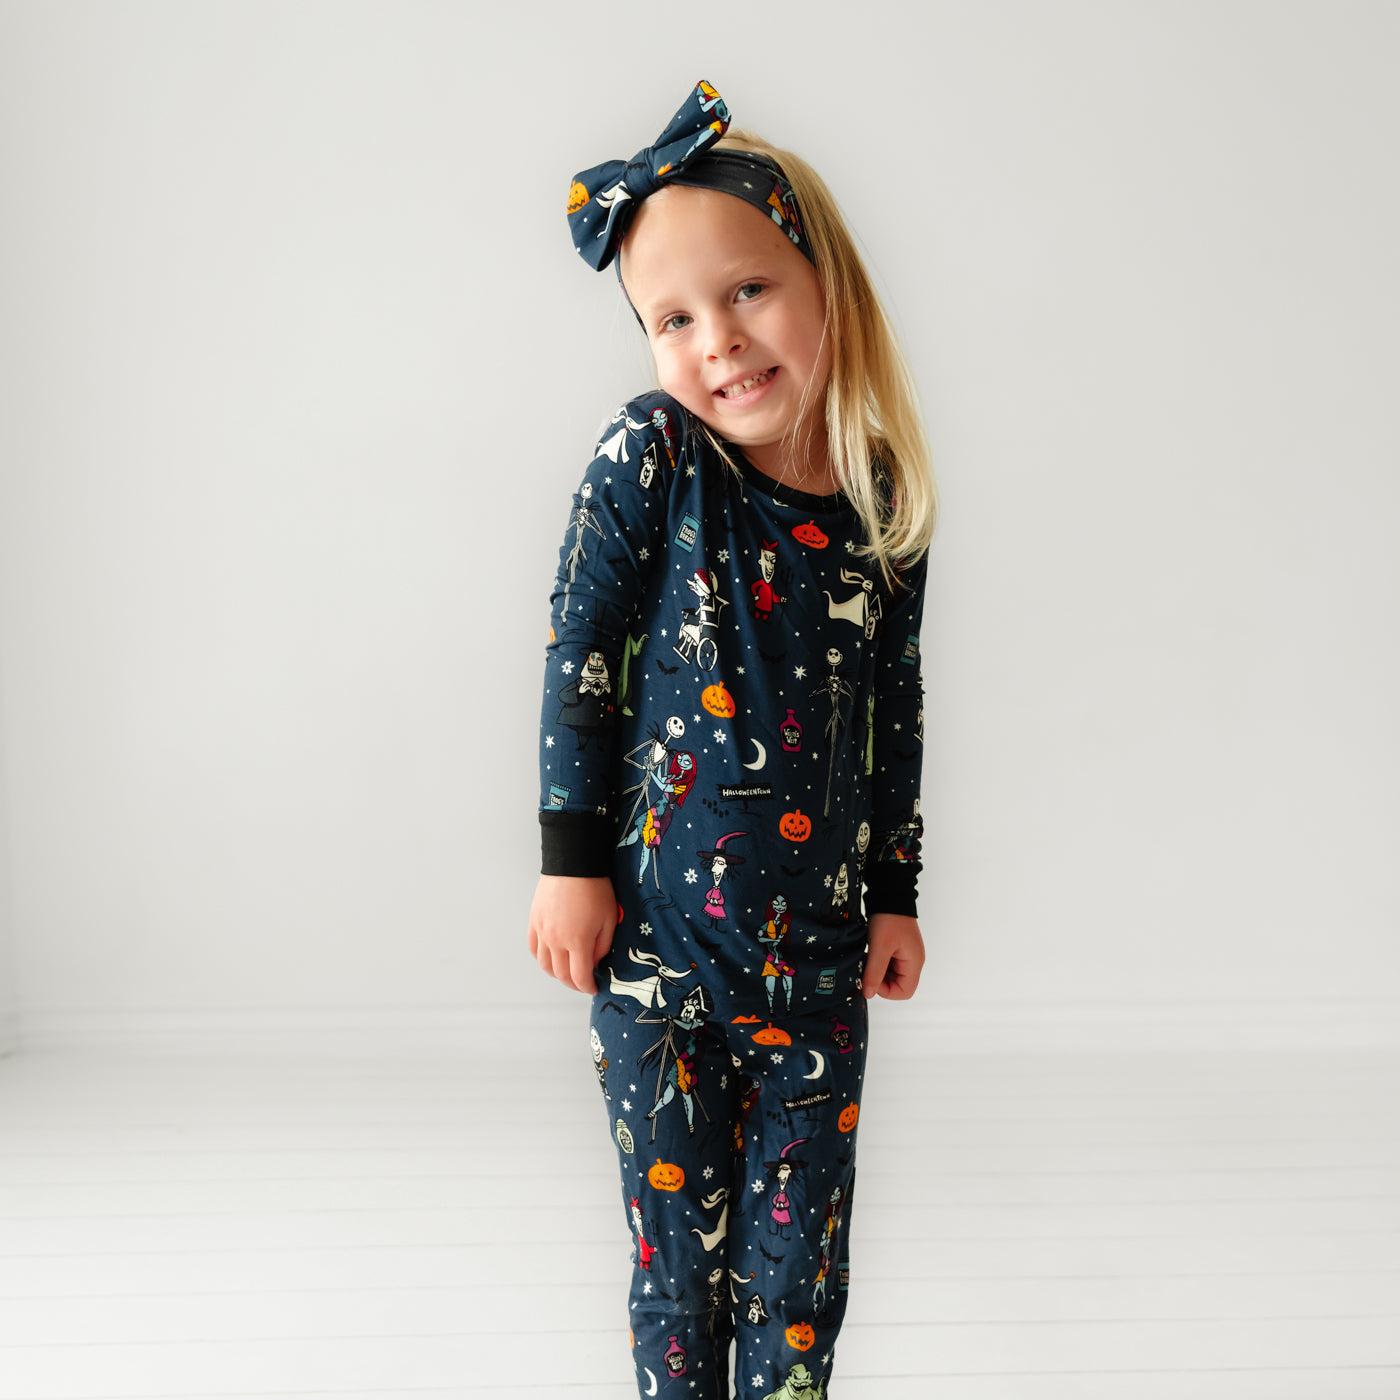 Child wearing a Jack Skellington and Friends printed two-piece pajama set and matching luxe bow headband